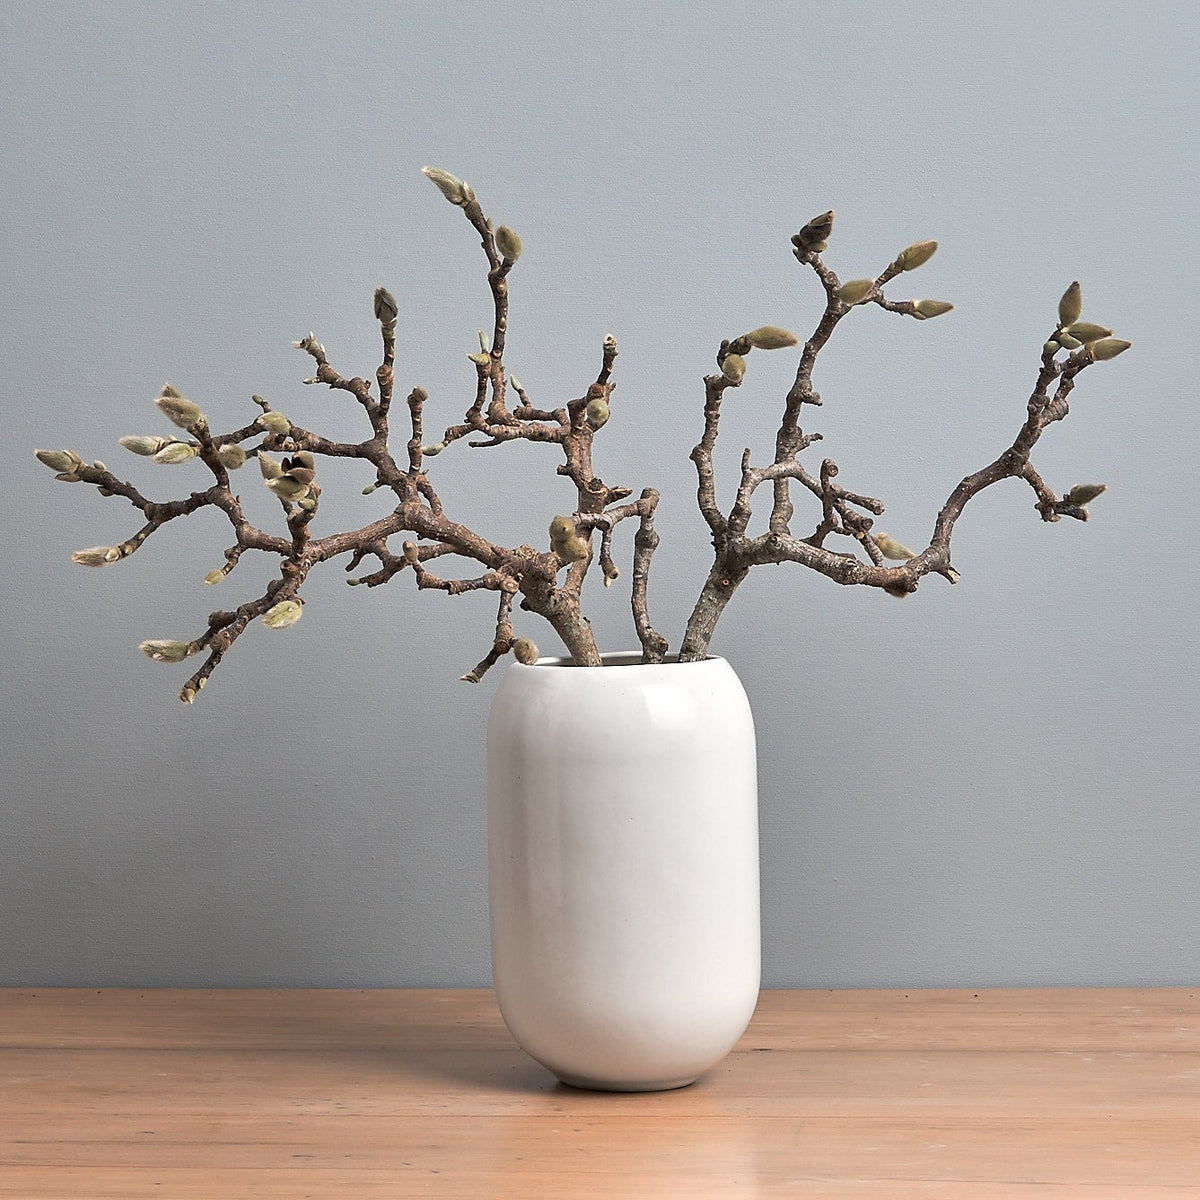 An Ovum Vase – Satin White by Gidon Bing with branches sitting on a wooden table.